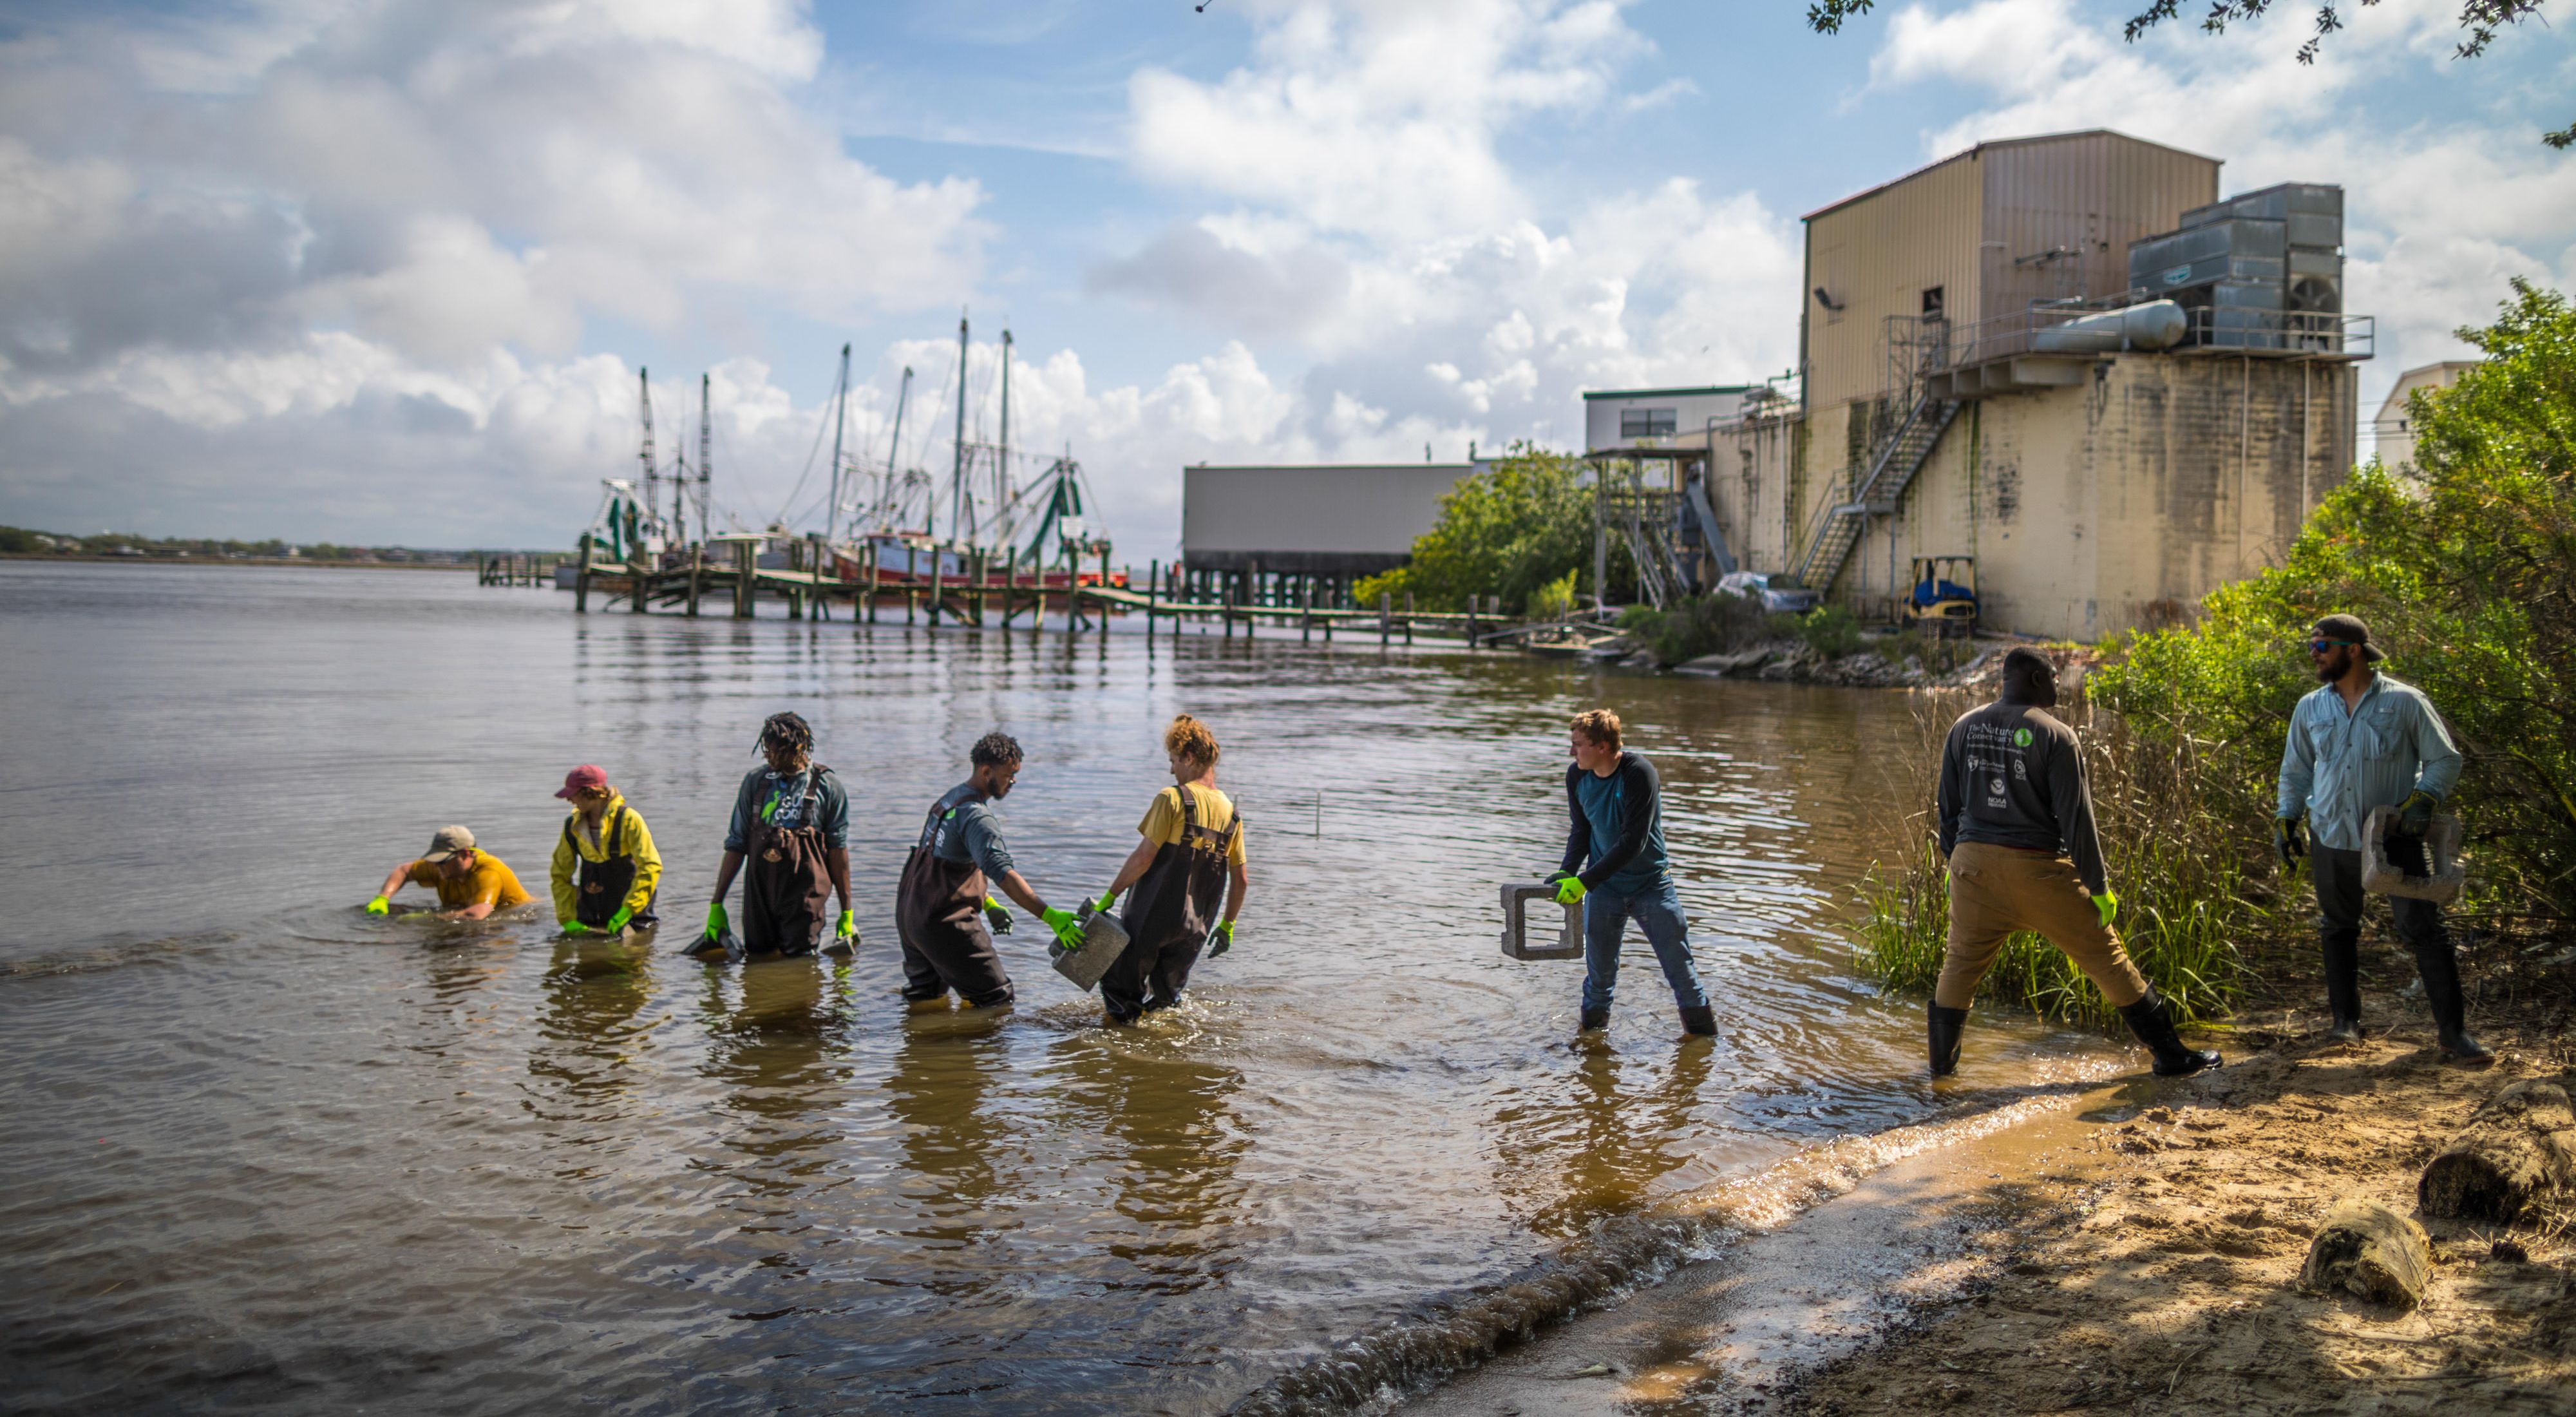 Members of GulfCorps create a living shoreline that will become a home to oysters and other water creatures along the last natural shoreline in Biloxi, Mississippi.